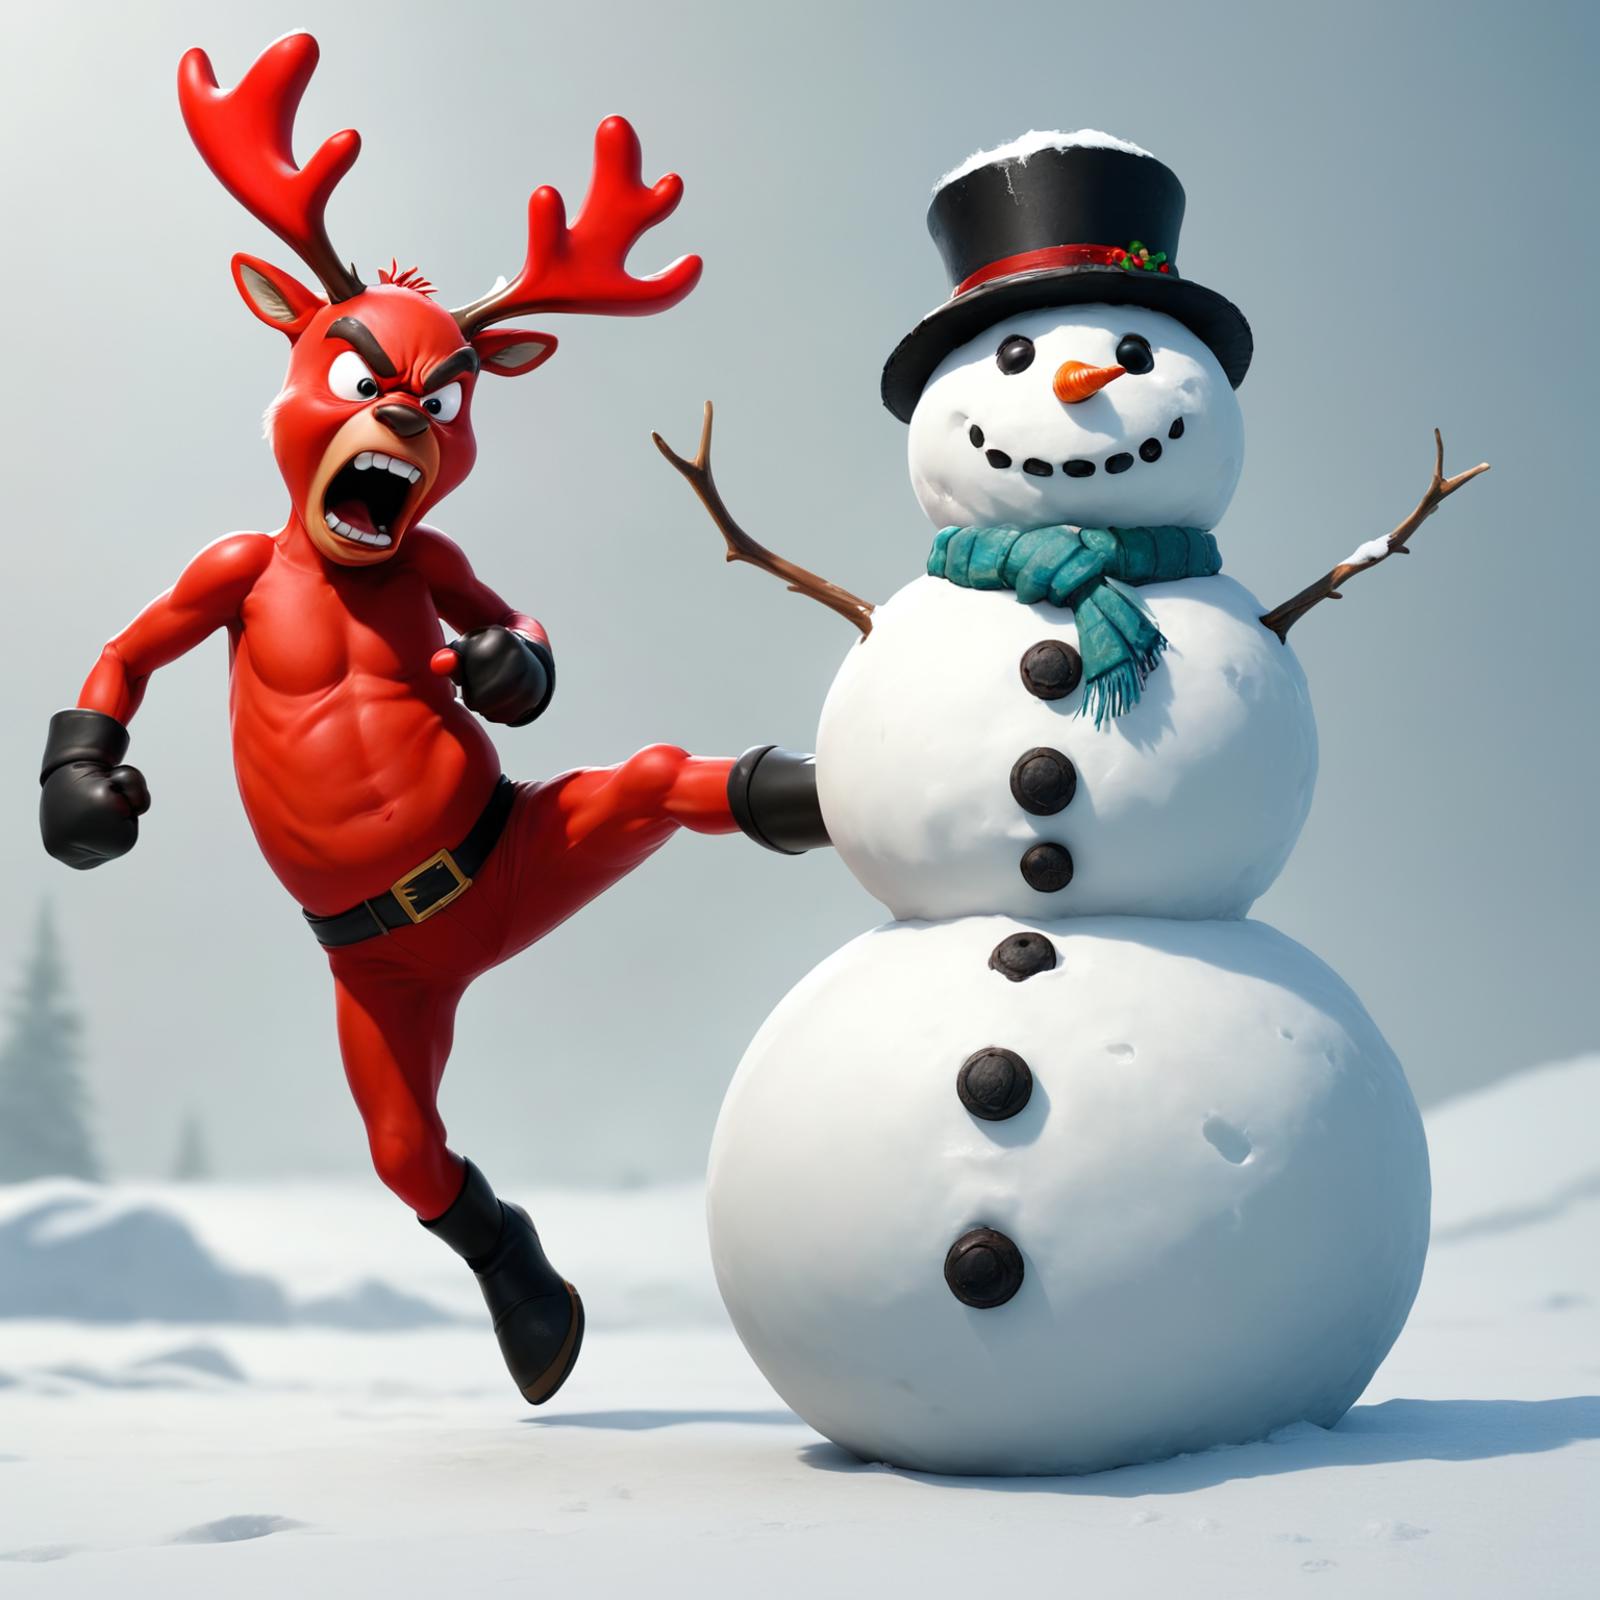 A red muscle man is kicking a snowman in the snow.